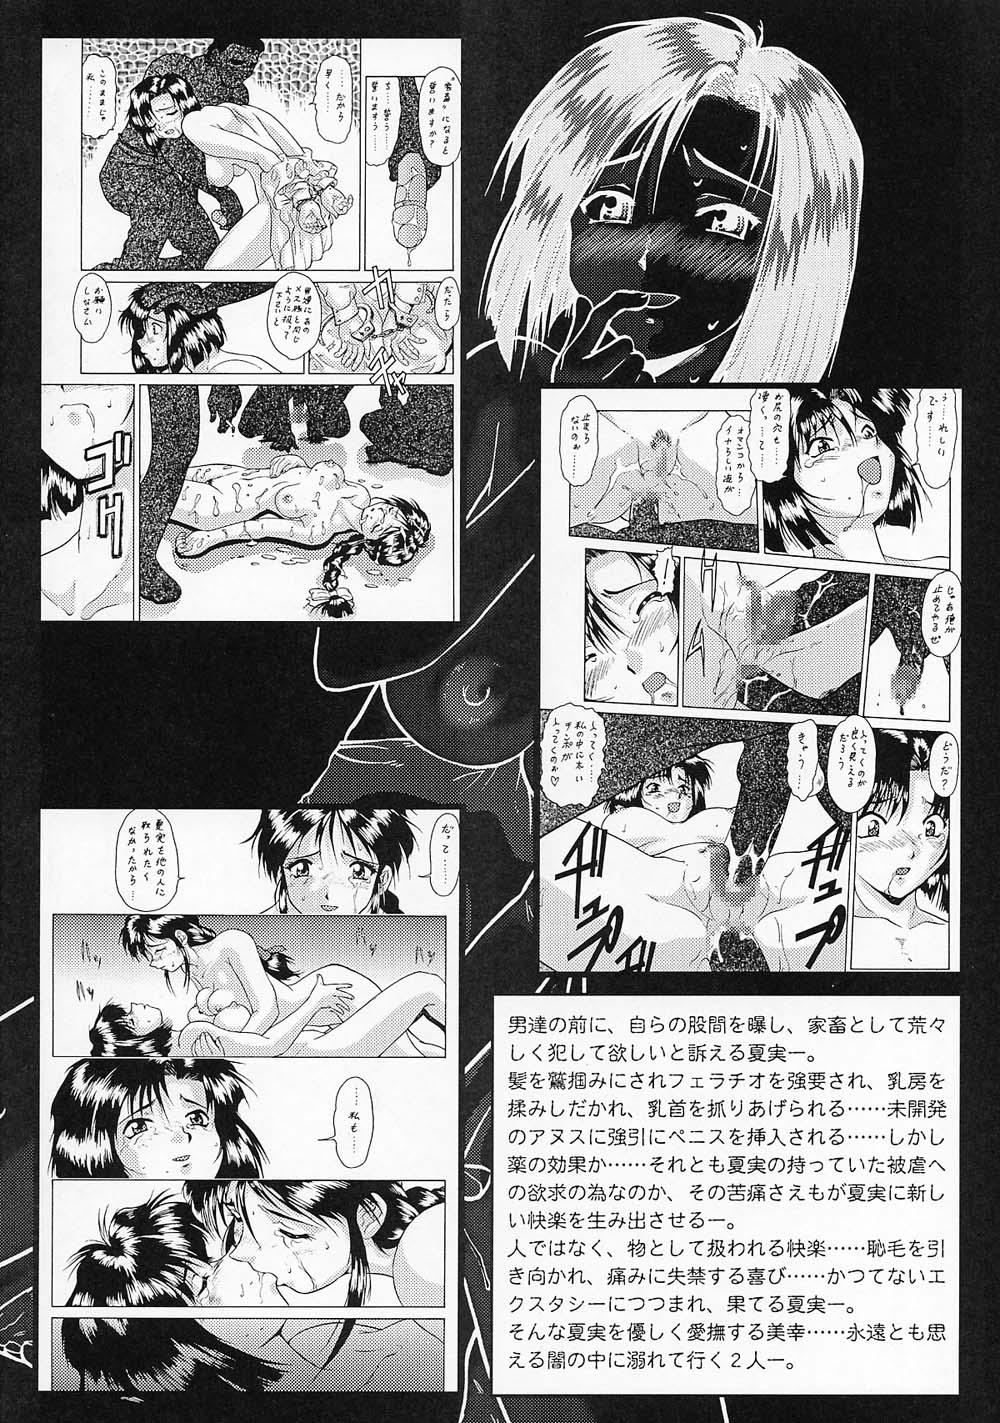 Fleshlight Taiho Shichauzo The Doujin Vol. 3 - Youre under arrest Finger - Page 8